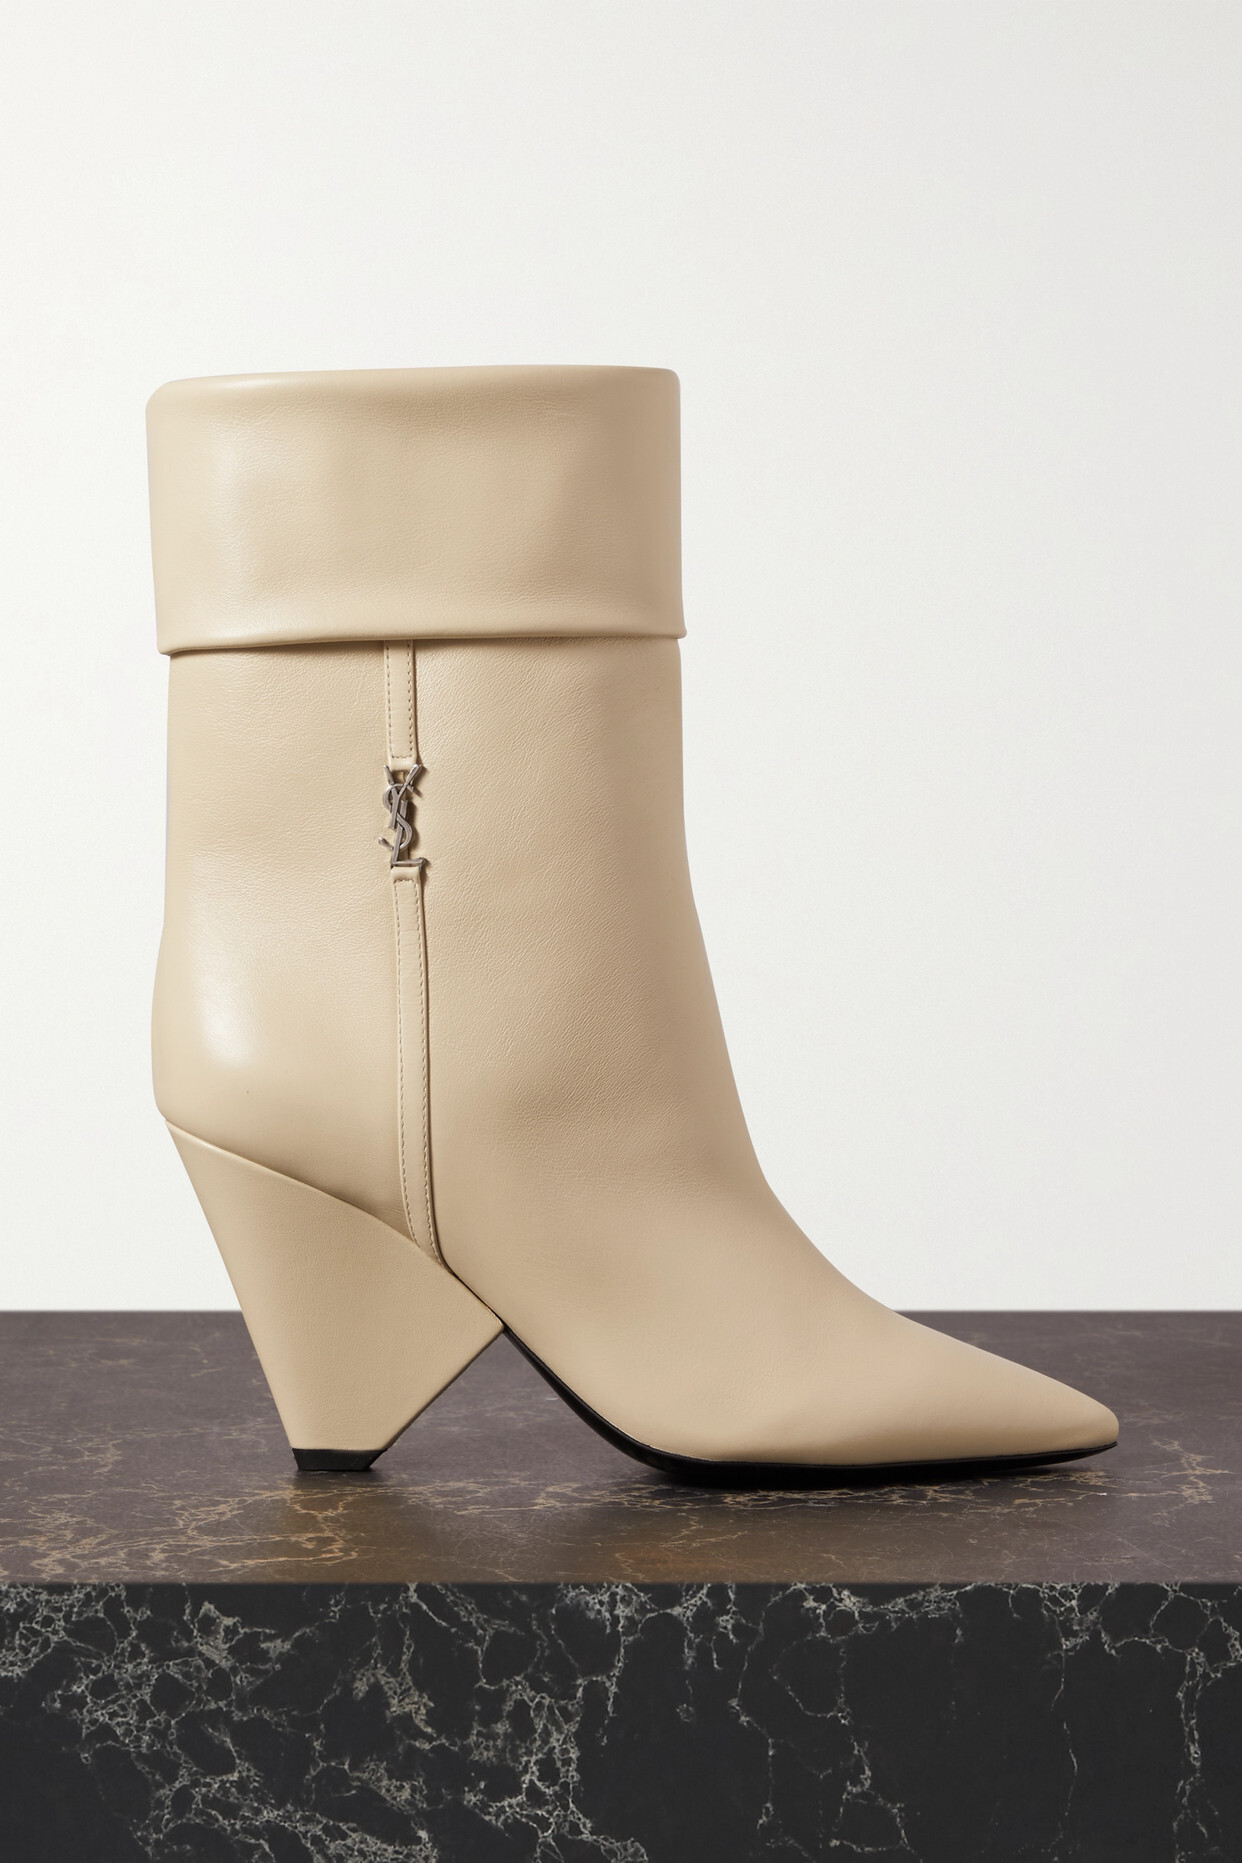 SAINT LAURENT - Niki Leather Ankle Boots - Off-white